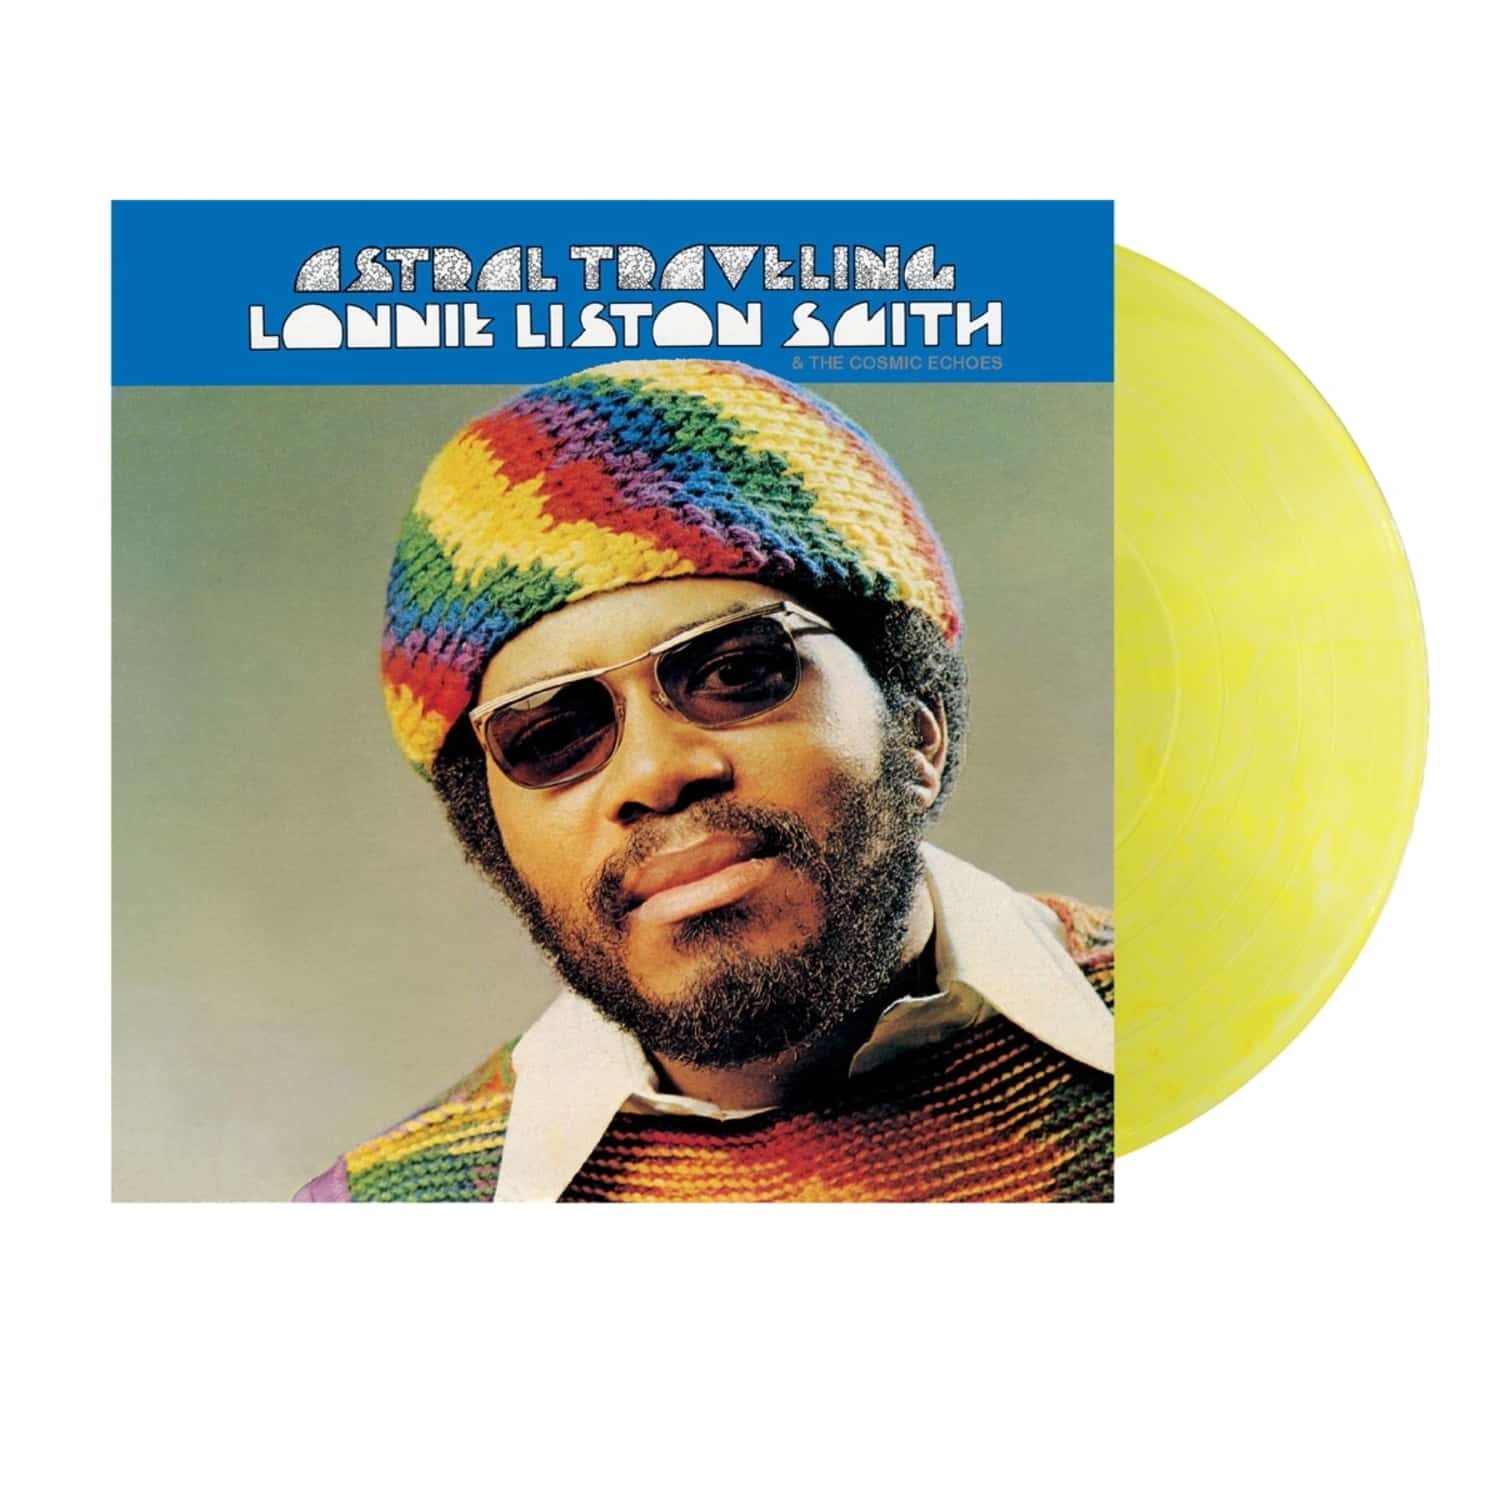 Lonnie Liston Smith & the Cosmic Echoes - ASTRAL TRAVELING 